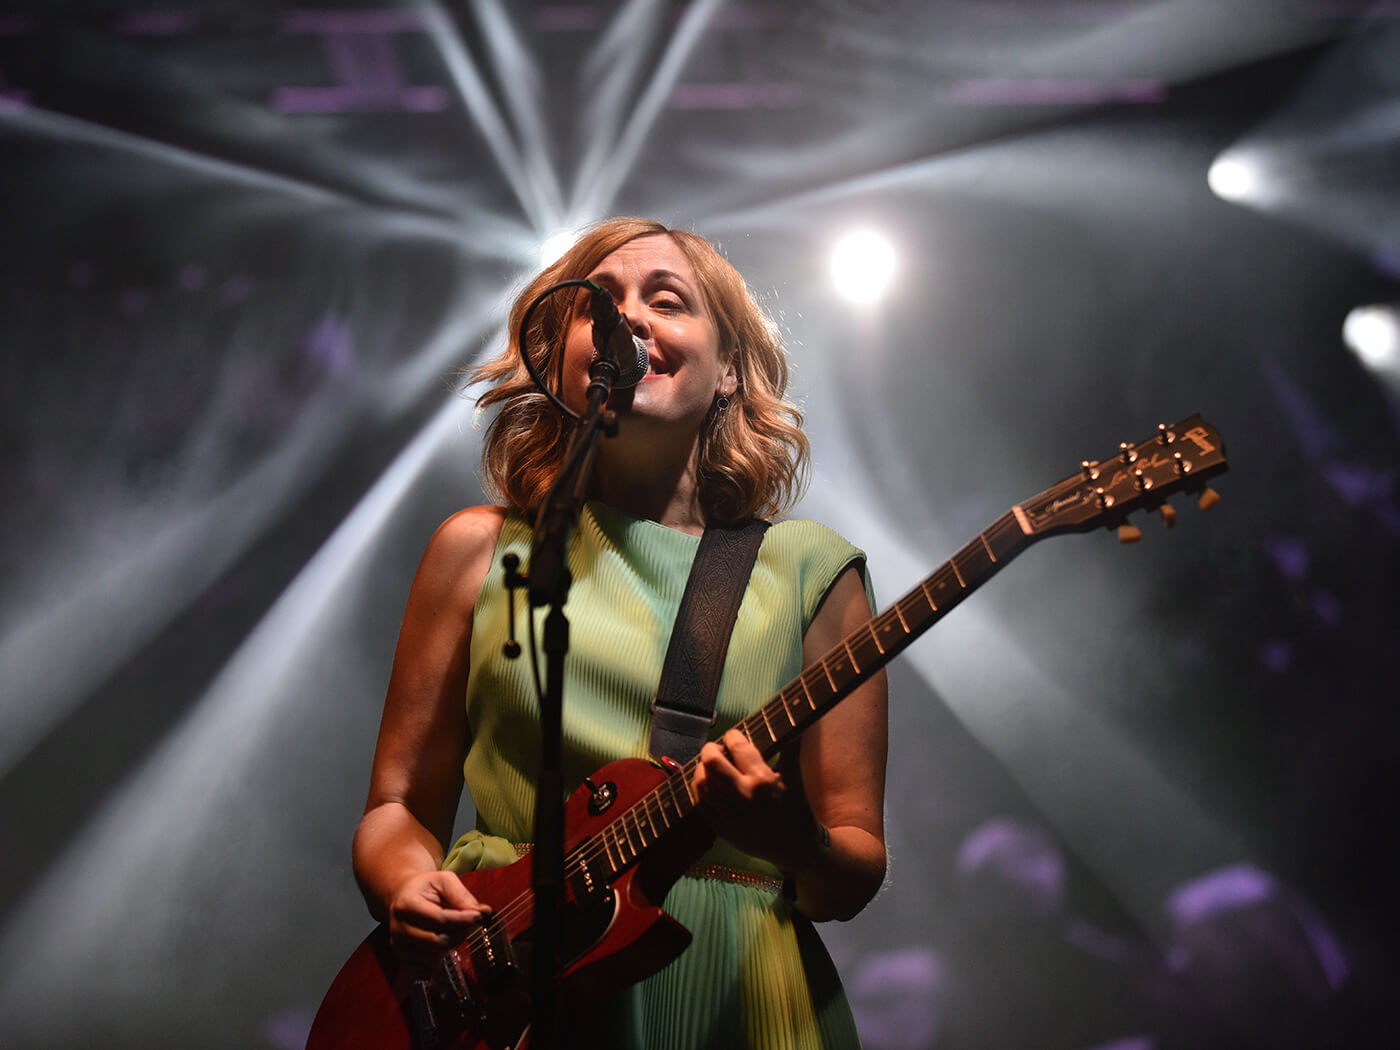 Corin Tucker of Sleater-Kinney performing with a Gibson Les Paul in 2016, photo by Thomas Cooper/WireImage via Getty Images